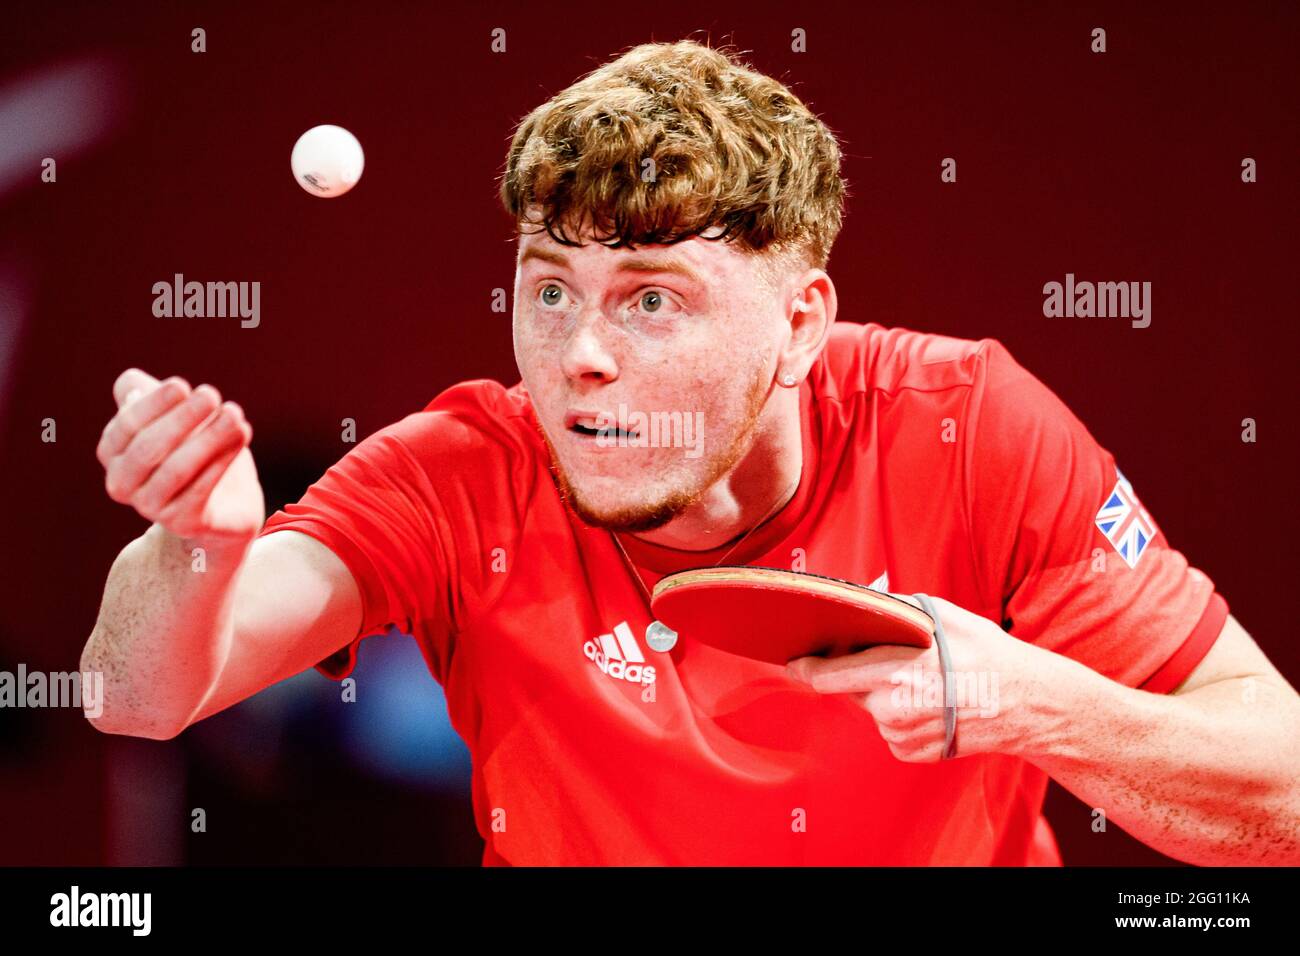 TOKYO, JAPAN. 28th Aug, 2021. Billy Shilton of Great Britain competes in Men’s Singles - Class 8 Quarterfinal 2 during Table Tennis QF SM and Finals of the Tokyo 2020 Paralympic games at Tokyo Metropolitan Gymnasium on Saturday, August 28, 2021 in TOKYO, JAPAN. Credit: Taka G Wu/Alamy Live News Stock Photo